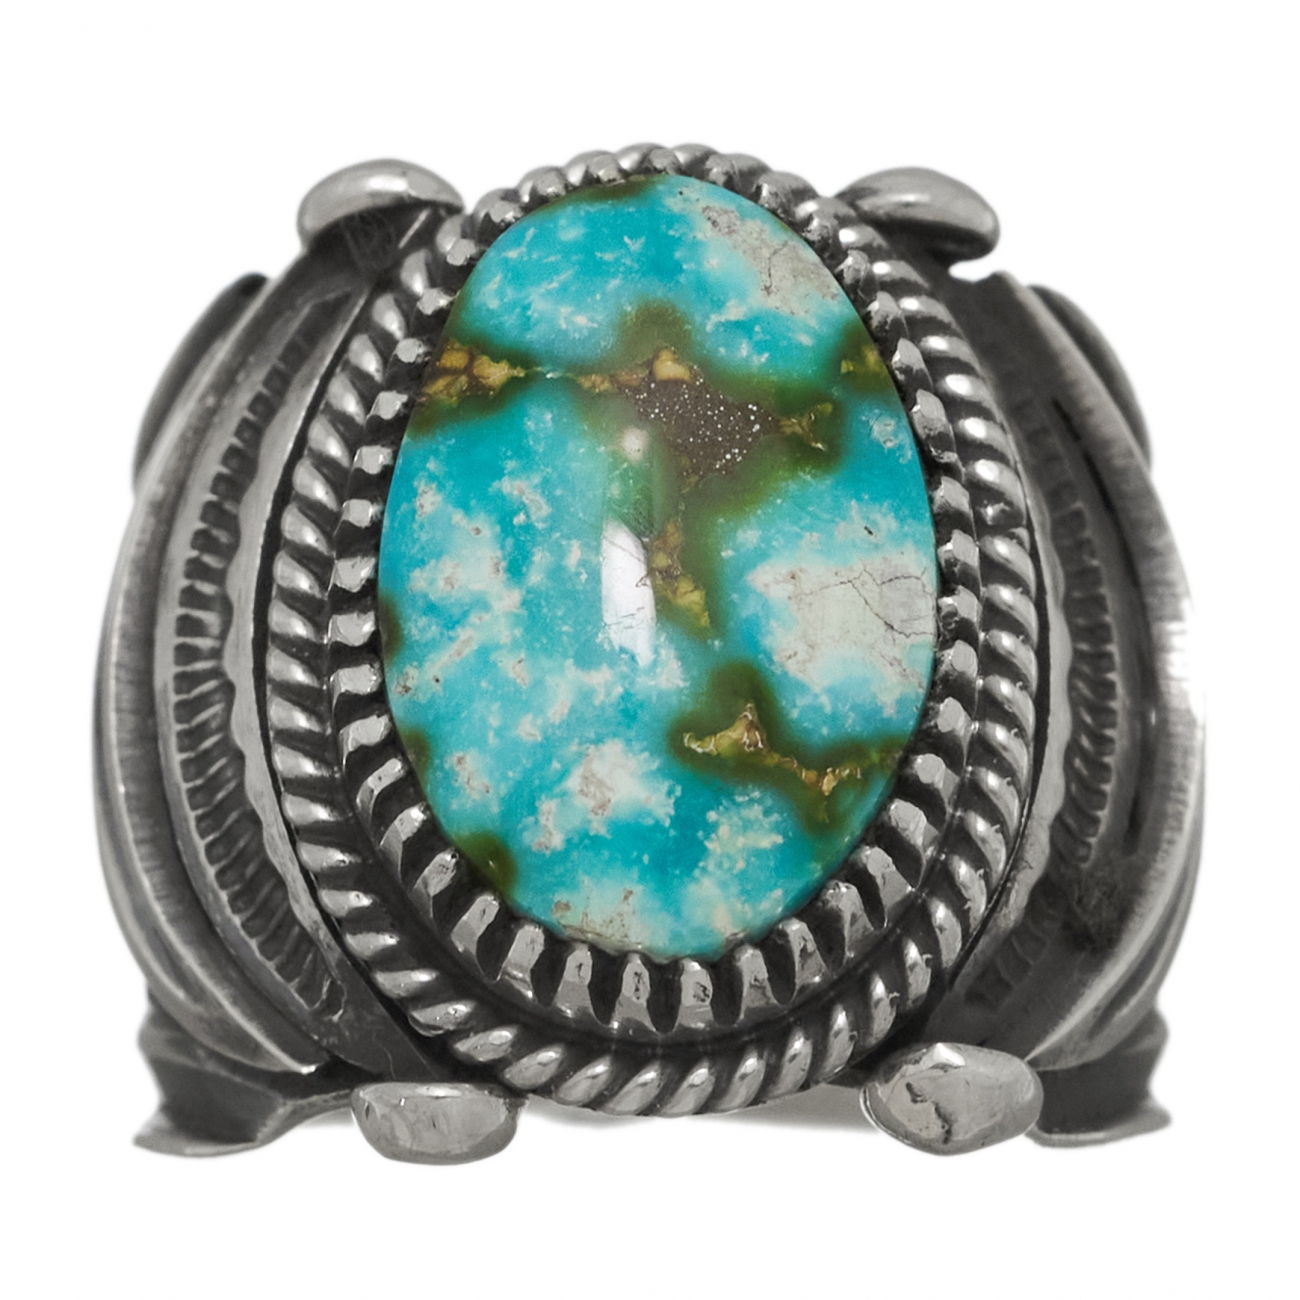 Navajo ring for women BA1059 in turquoise and silver - Harpo Paris